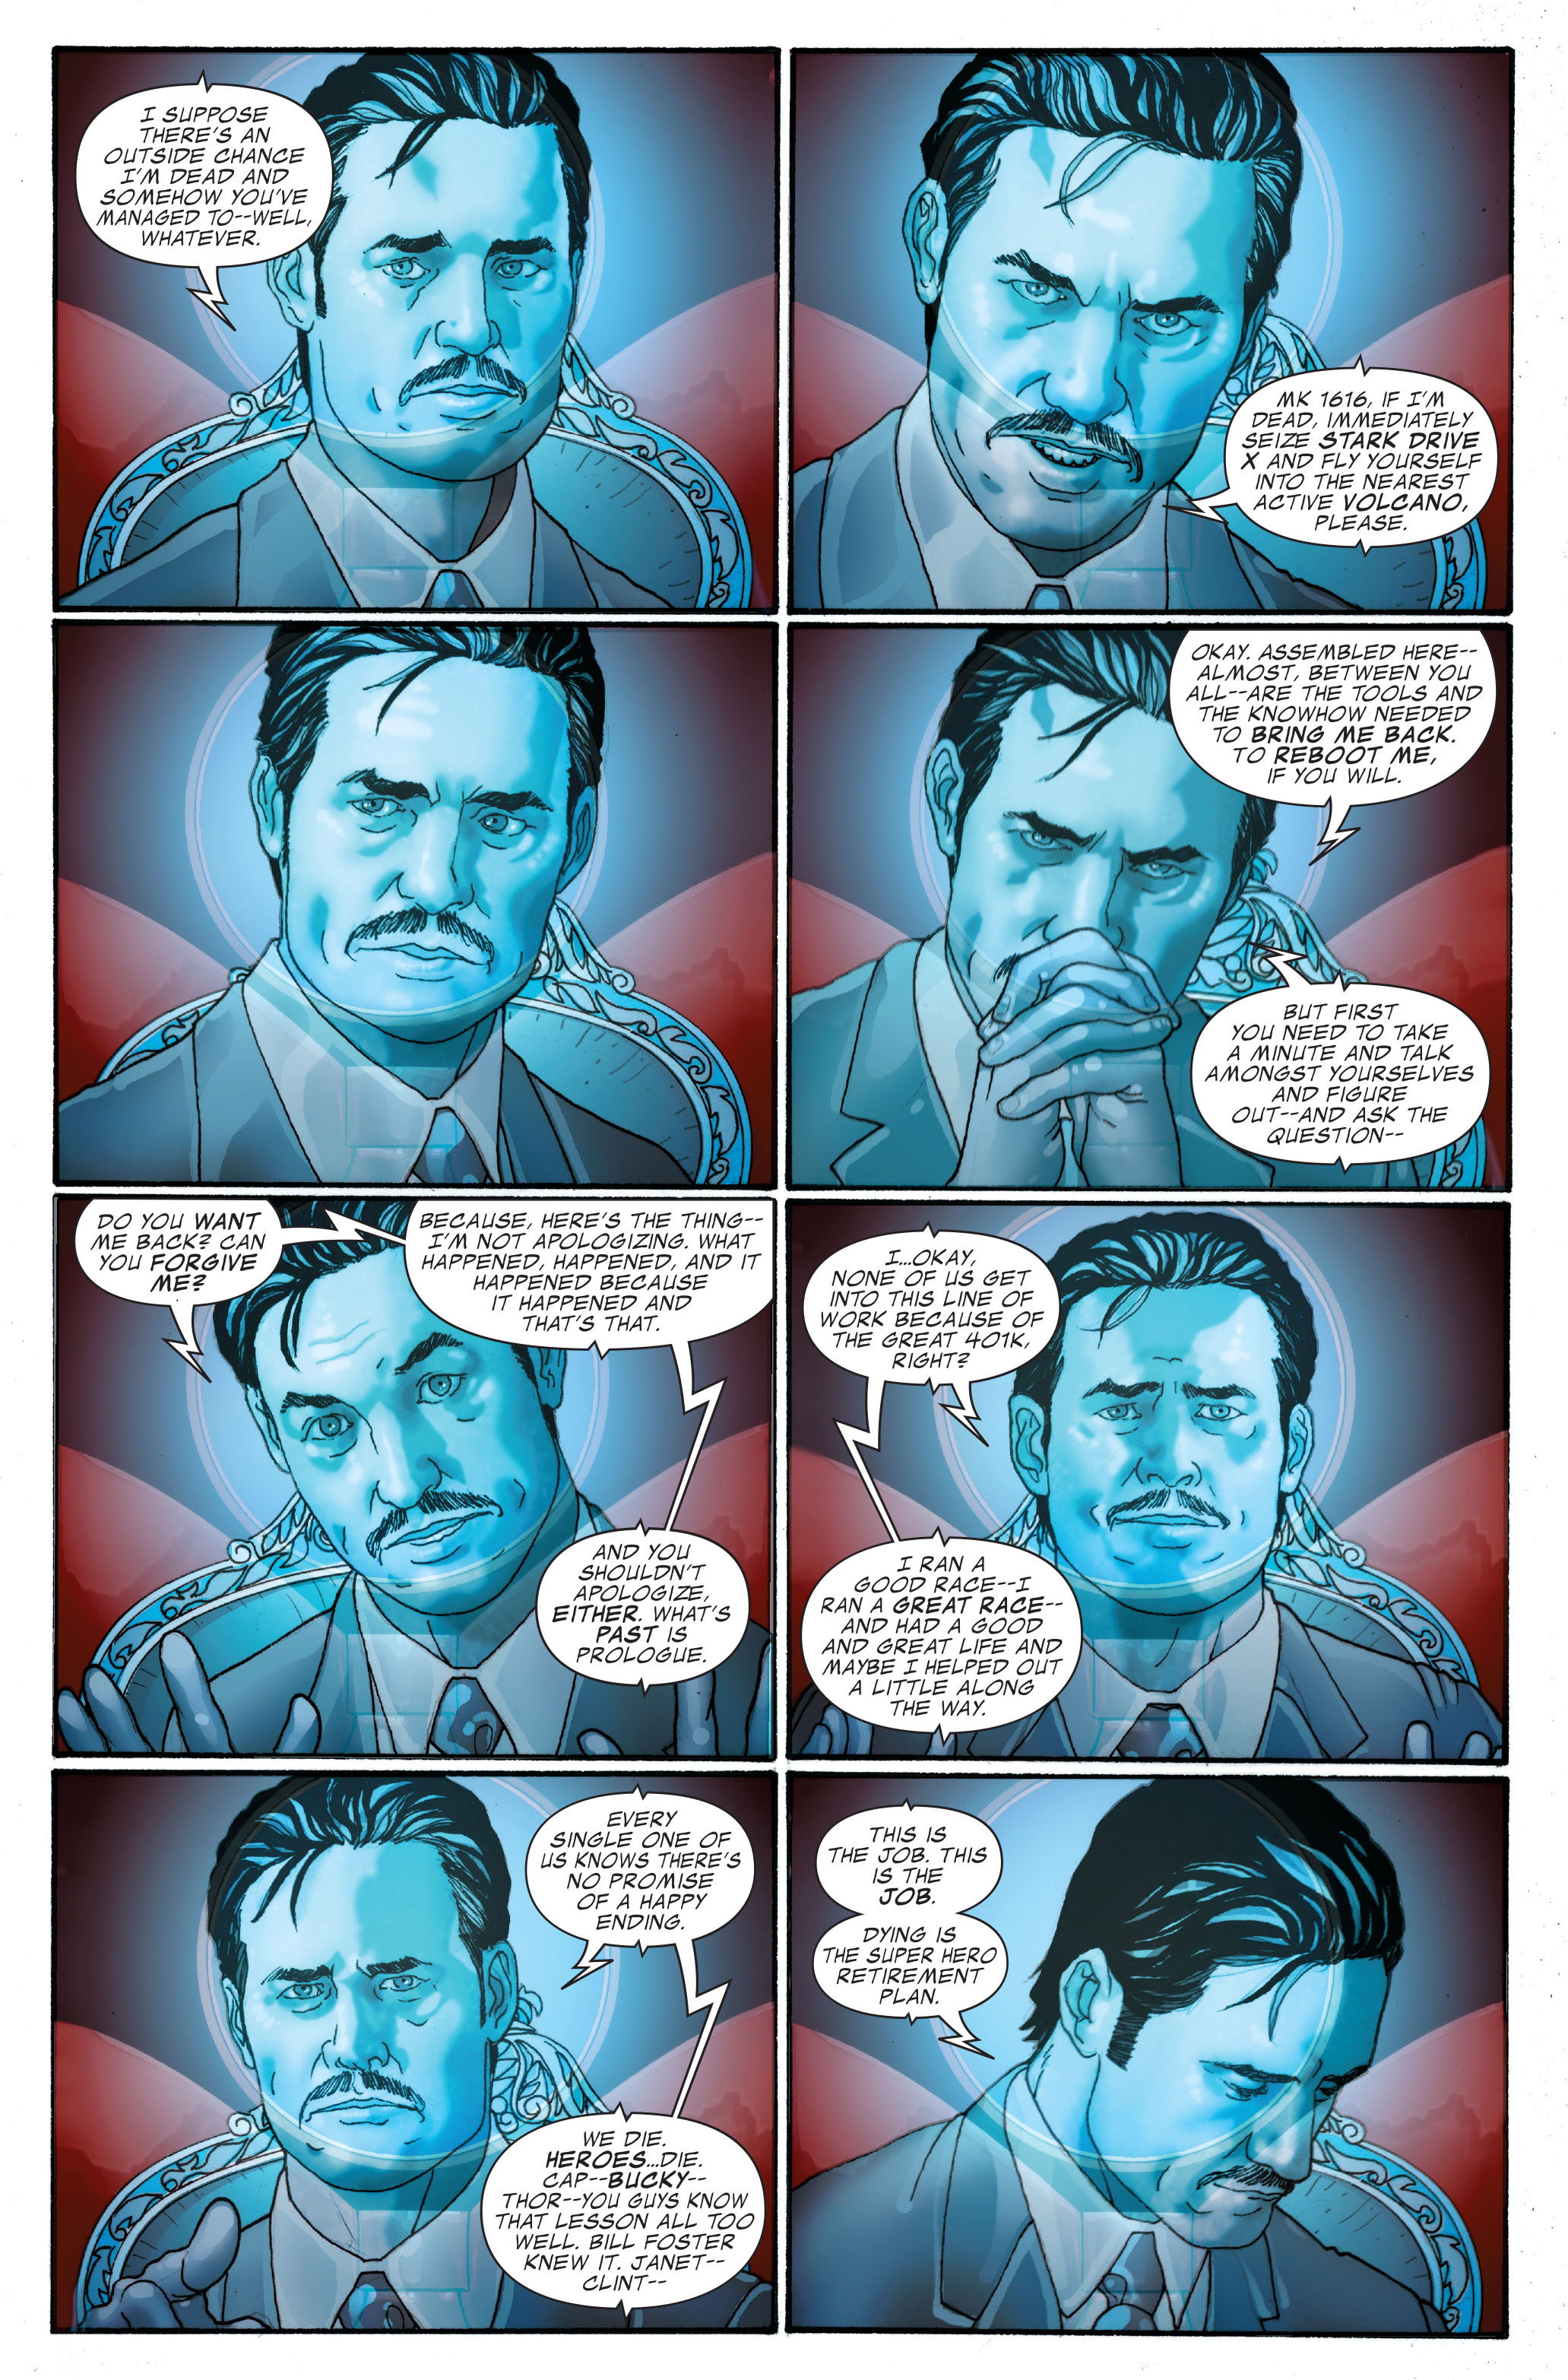 Invincible Iron Man (2008) 20 Page 6